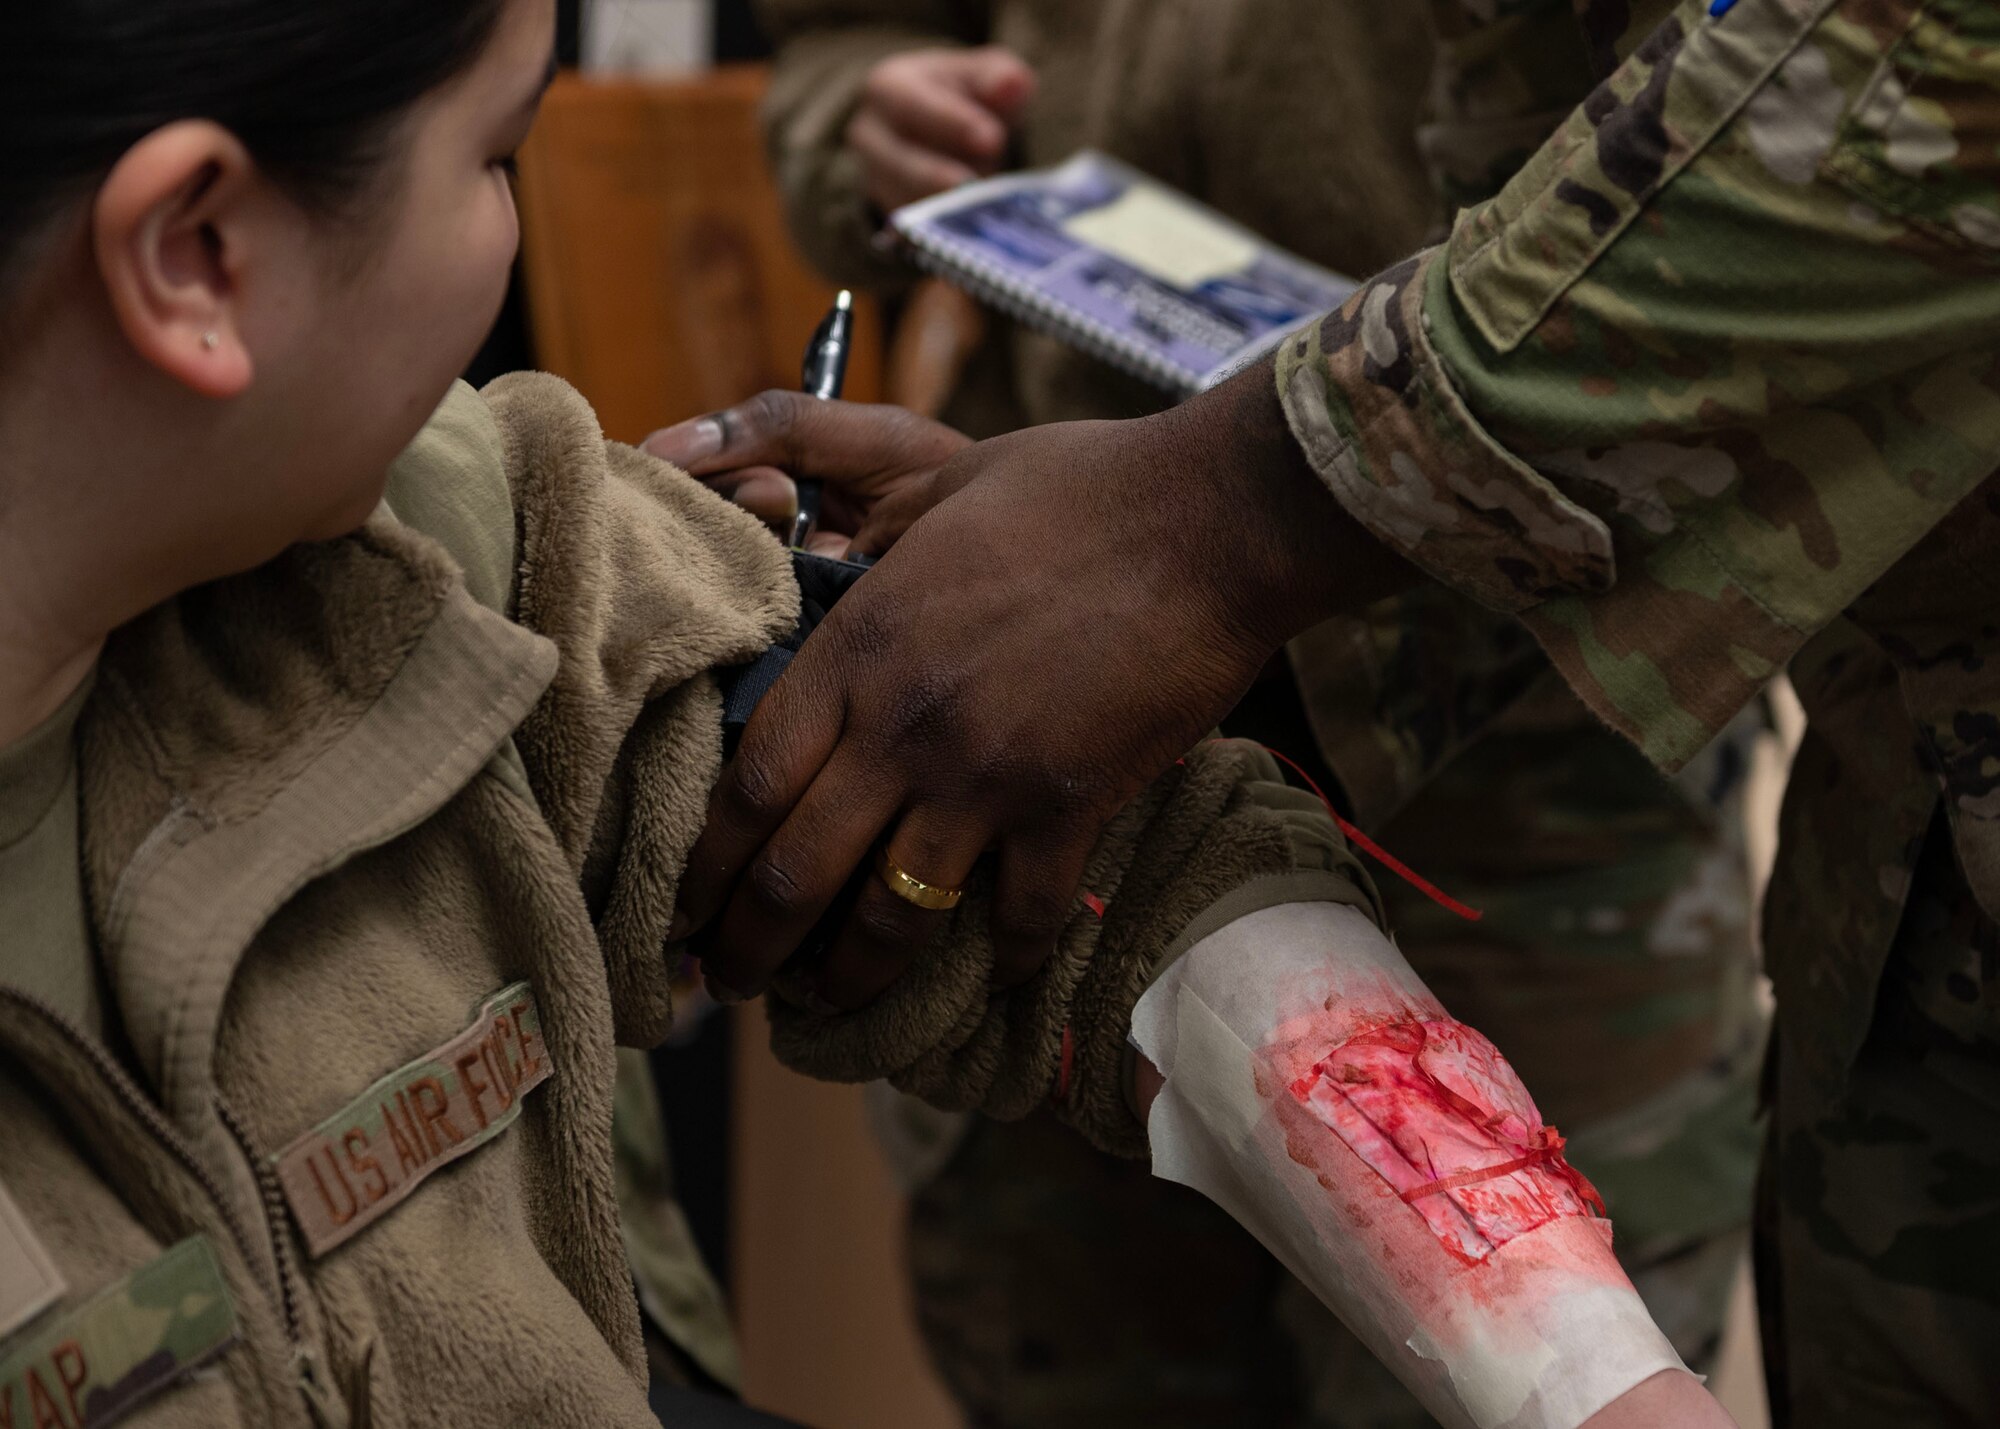 U.S. Air Force Staff Sgt. Angelica Yap, 51st Comptroller Squadron financial operations supervisor, receives tactical combat casualty care from Senior Airman Maaliq Williams, 51st Comptroller Squadron finance customer service technician, during Beverly Midnight 24-1 at Osan Air Base, Republic of Korea, Jan. 29, 2024. During TCCC training, service members learn the MARCH algorithm: massive bleeding, airway, respiration, circulation and hypothermia/head injuries. MARCH provides the order in which the life-saving skills should be applied. This affords a better opportunity to work as a team to make sure combat injuries are treated both quickly and properly. (U.S. Air Force photo by Staff Sgt. Aubree Owens)